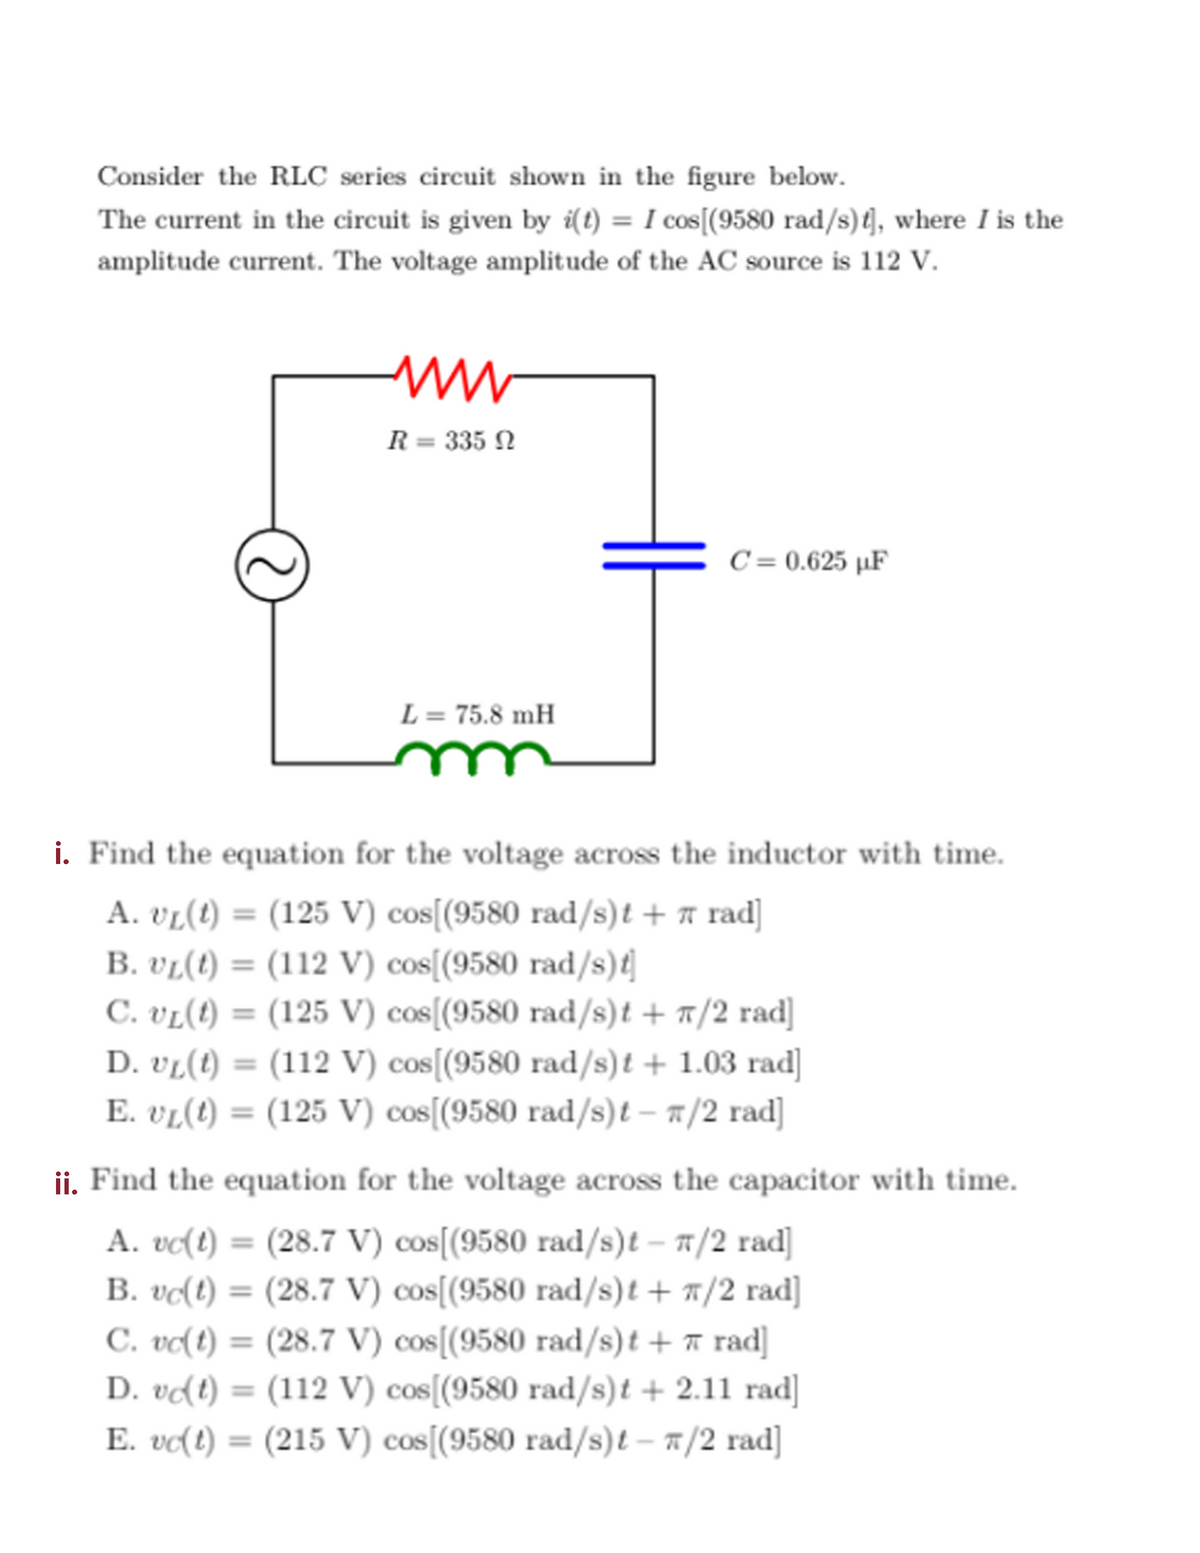 Consider the RLC series circuit shown in the figure below.
The current in the circuit is given by i(t) = I cos[(9580 rad/s)t], where I is the
amplitude current. The voltage amplitude of the AC source is 112 V.
R = 335 N
C = 0.625 µF
L = 75.8 mH
i. Find the equation for the voltage across the inductor with time.
A. vL(t) = (125 V) cos[(9580 rad/s)t + a rad]
B. vµ(t) = (112 V) cos[(9580 rad/s)t|
C. vĽ(t) = (125 V) cos[(9580 rad/s)t + «/2 rad]
%3D
%3D
D. vµ(t) = (112 V) cos[(9580 rad/s)t + 1.03 rad]
E. v1(t) = (125 V) cos[(9580 rad/s)t – a/2 rad]
ii. Find the equation for the voltage across the capacitor with time.
A. vo(t) = (28.7 V) cos[(9580 rad/s)t – 7/2 rad]
B. vc(t) = (28.7 V) cos[(9580 rad/s)t + x/2 rad]
C. vo(t) = (28.7 V) cos[(9580 rad/s)t + ™ rad]
D. vďt) = (112 V) cos[(9580 rad/s)t + 2.11 rad]
E. vo(t) = (215 V) cos[(9580 rad/s)t – a/2 rad]
%3D
